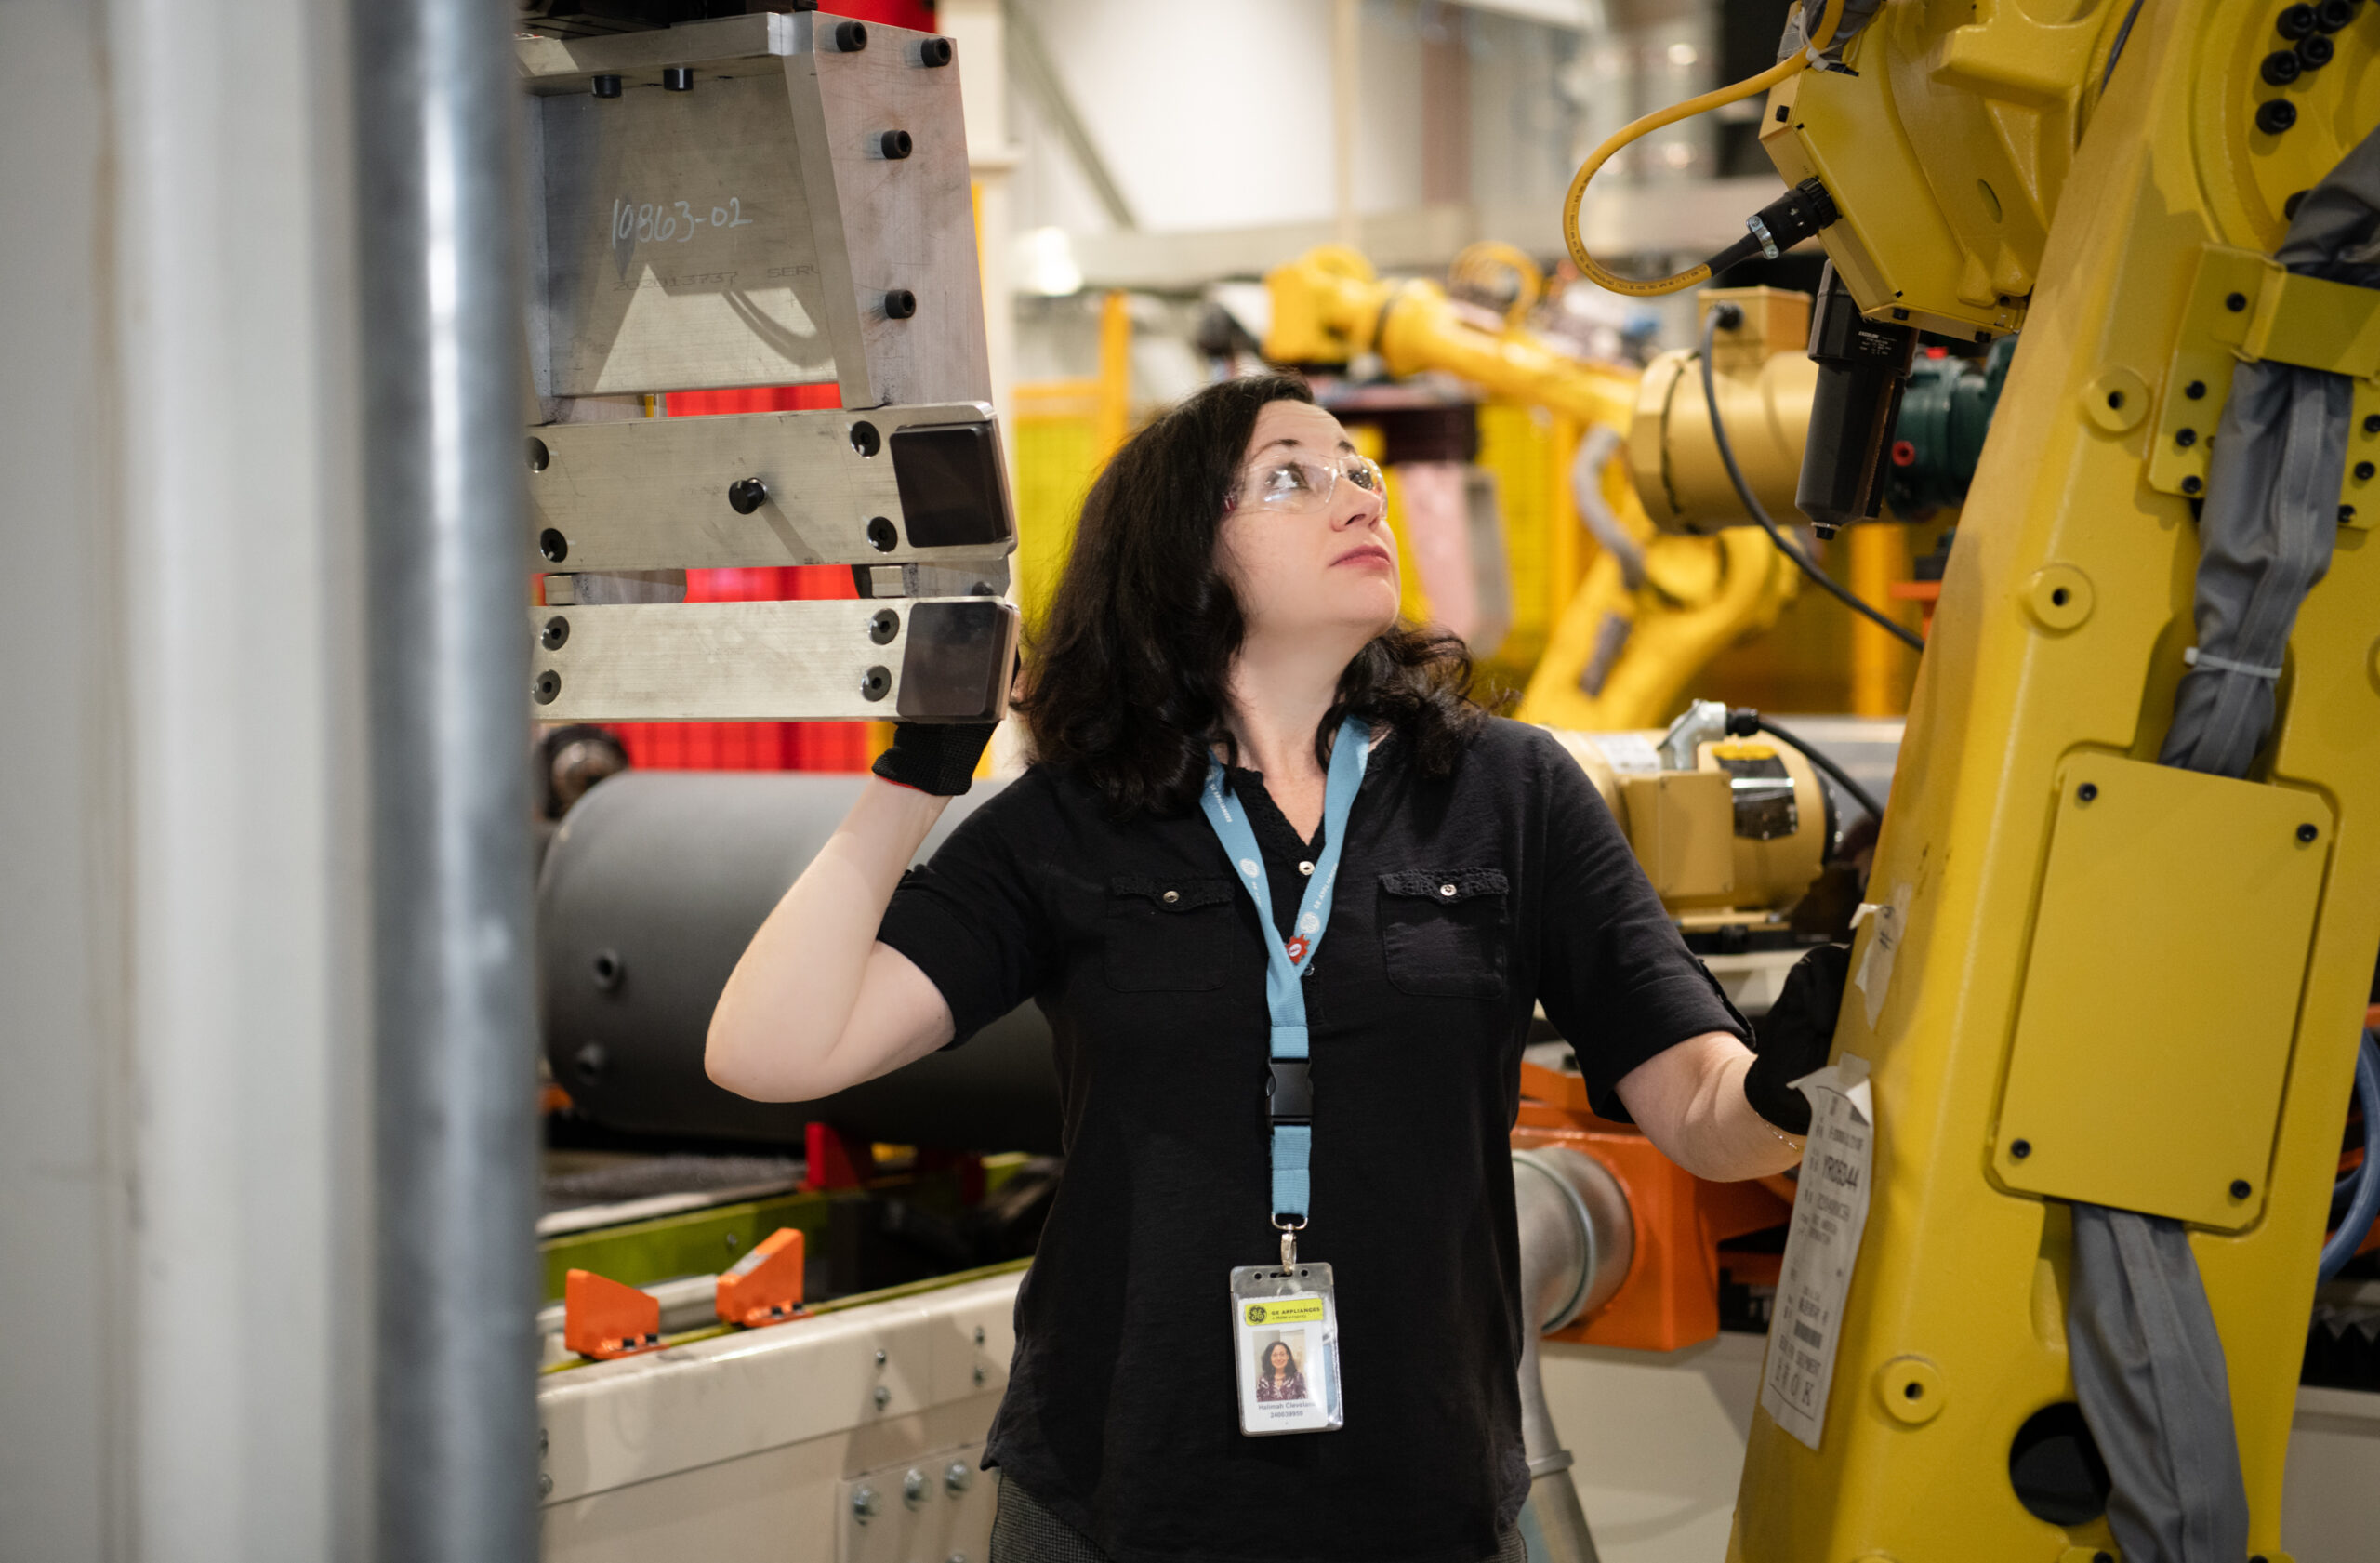 Halimah Cleveland inspects the cooling line on new robotic equipment.